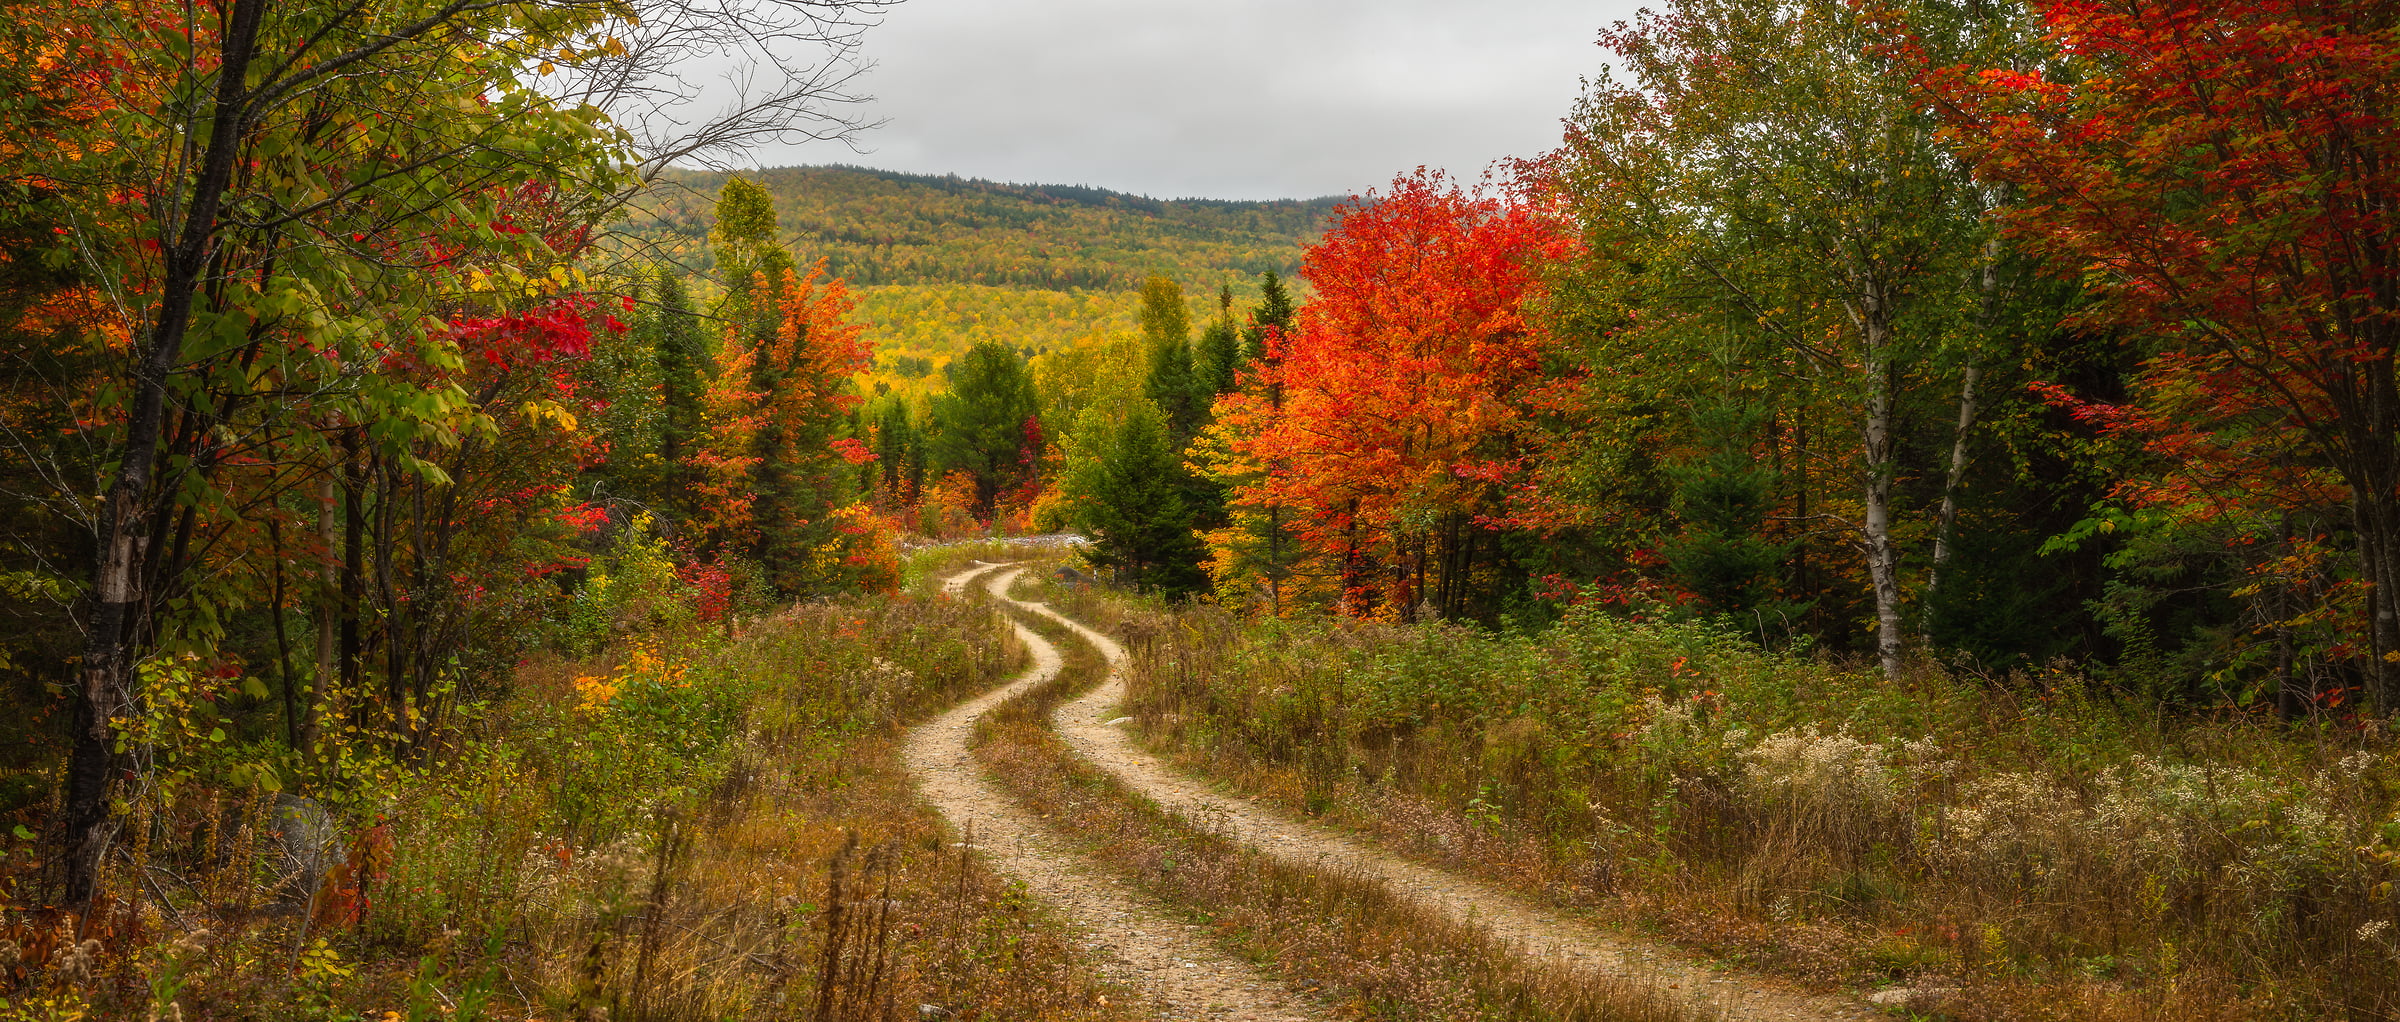 119 megapixels! A very high resolution, large-format photo of colorful fall foliage, leaves, and a winding dirt road; fine art photograph created by Aaron Priest in Northeast Piscataquis, Maine.